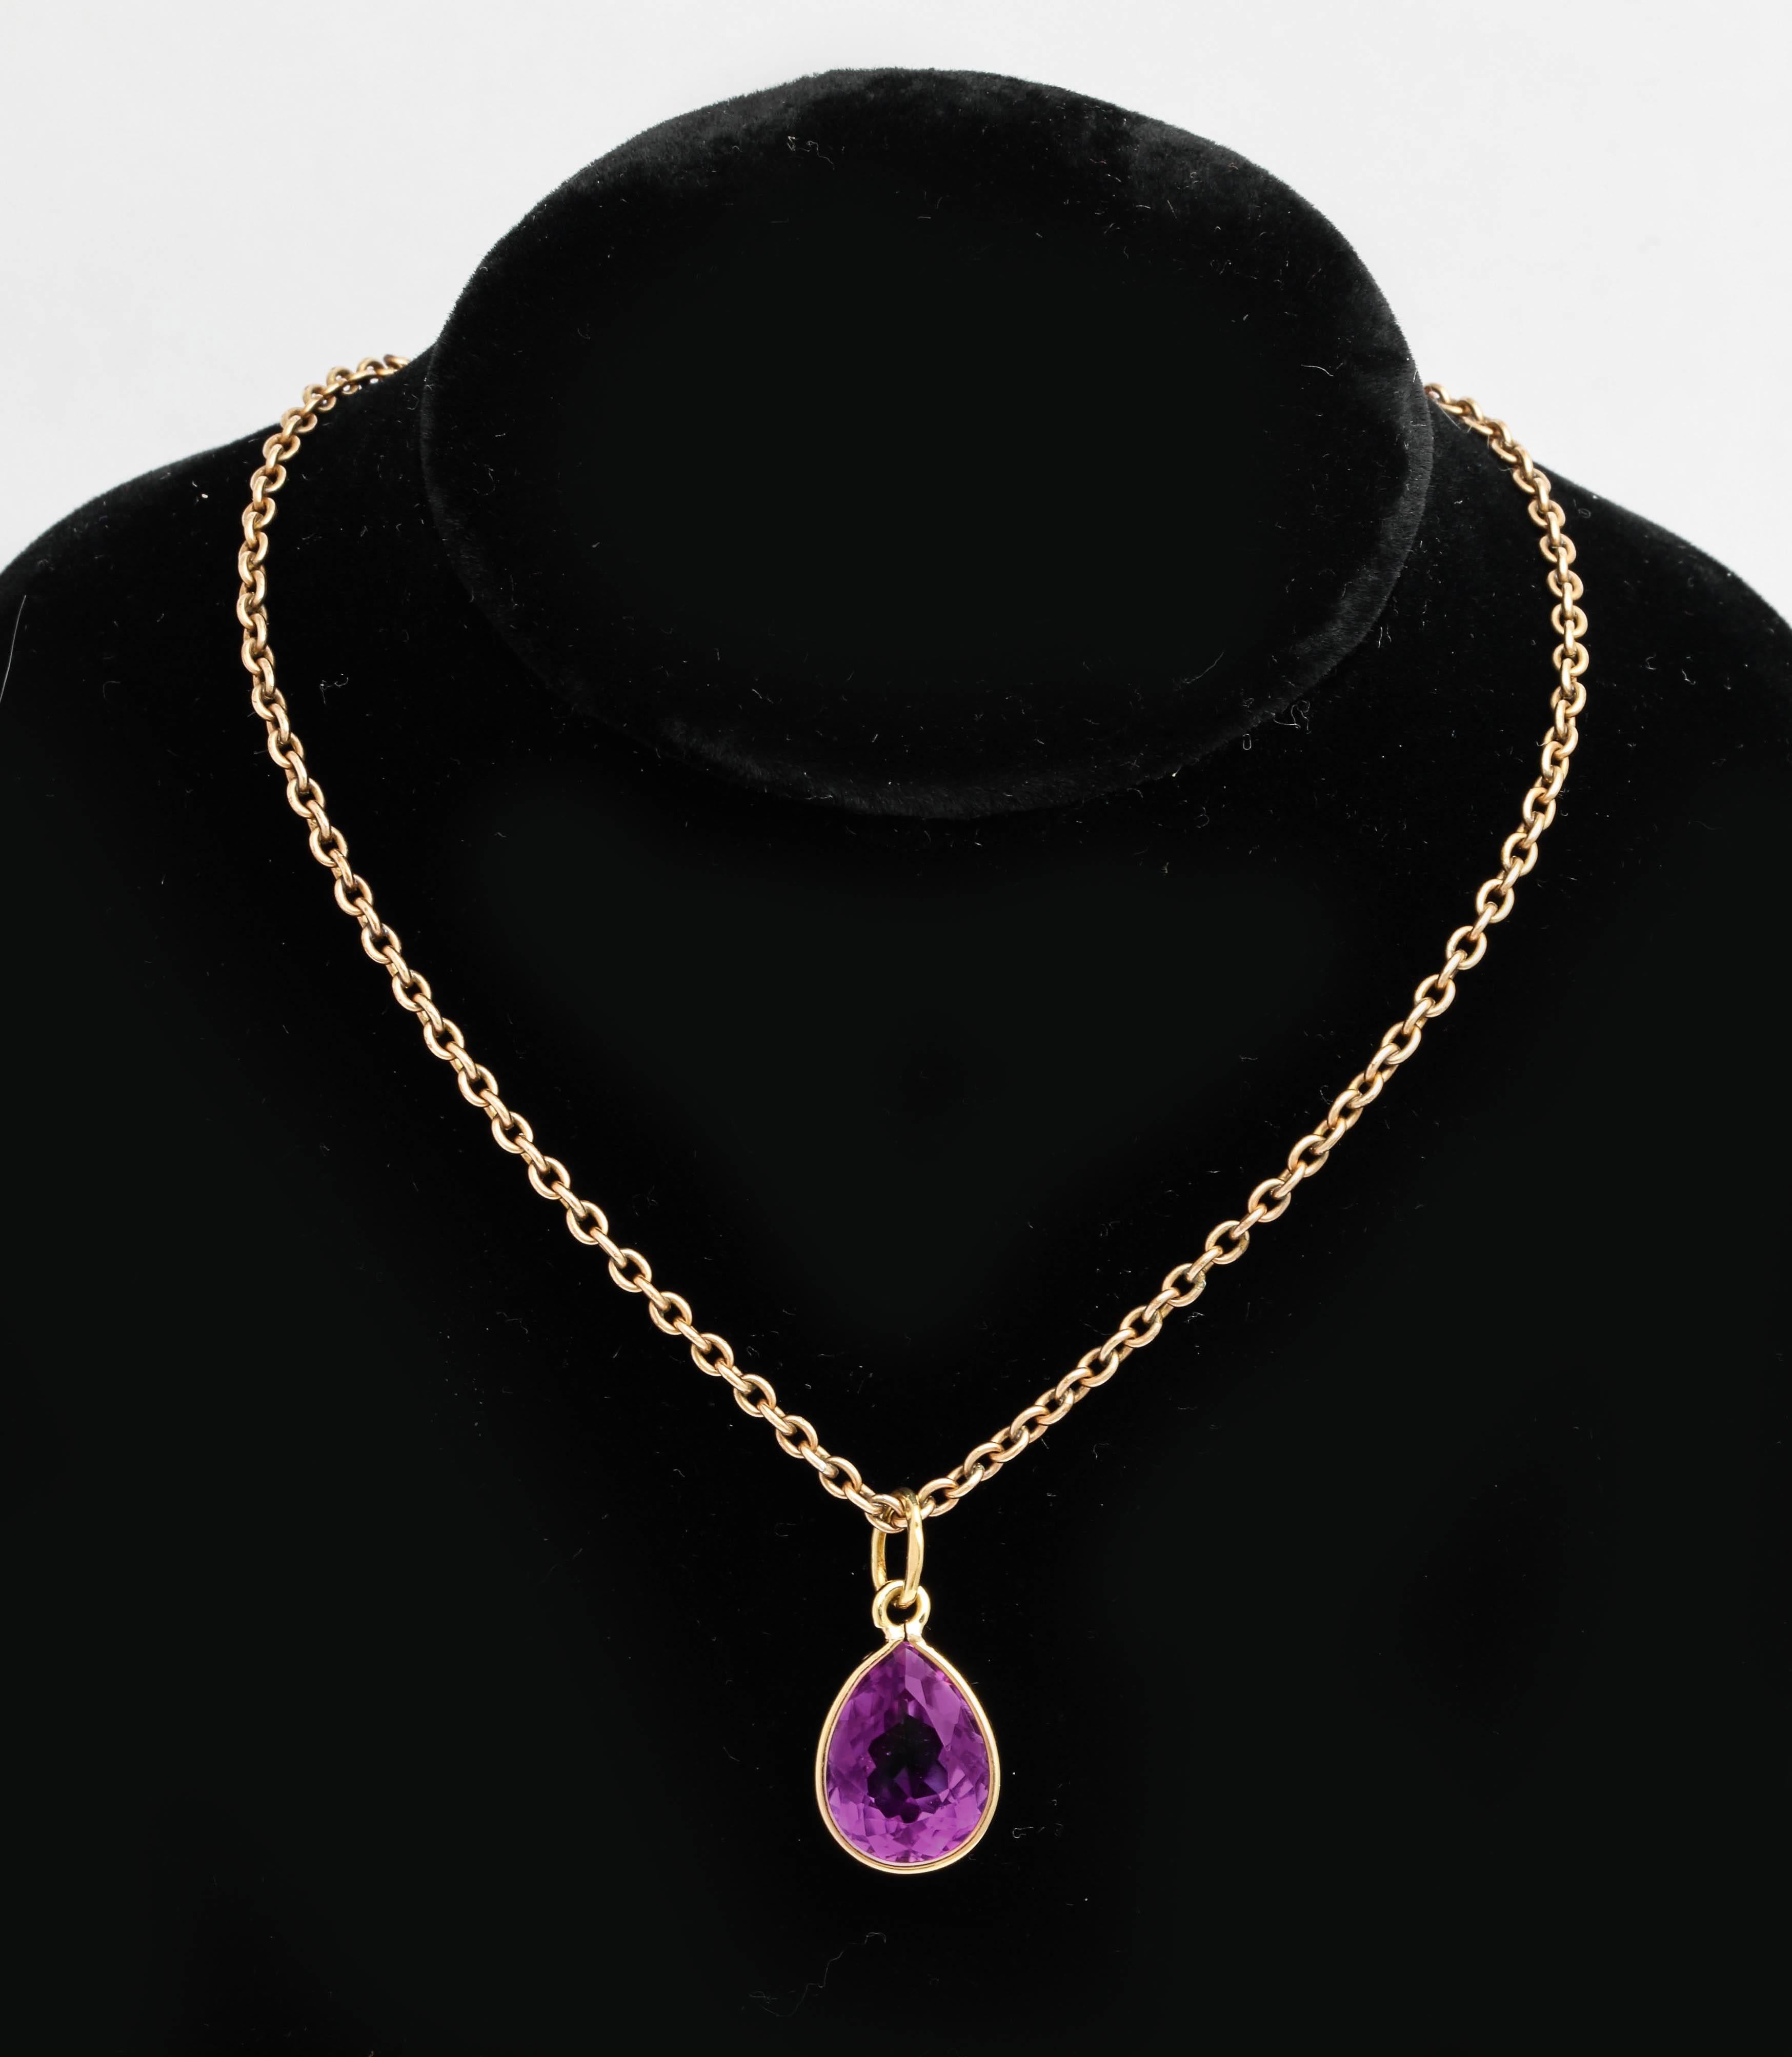 A beautiful amethyst 18k yellow gold pendant set with a tear drop shaped faceted amethyst of deep violet color, bezel set in 18k yellow gold with large suspension ring to accommodate most chains.

Stamped 750, 20th century. 

1 in. (2.5 cm) long